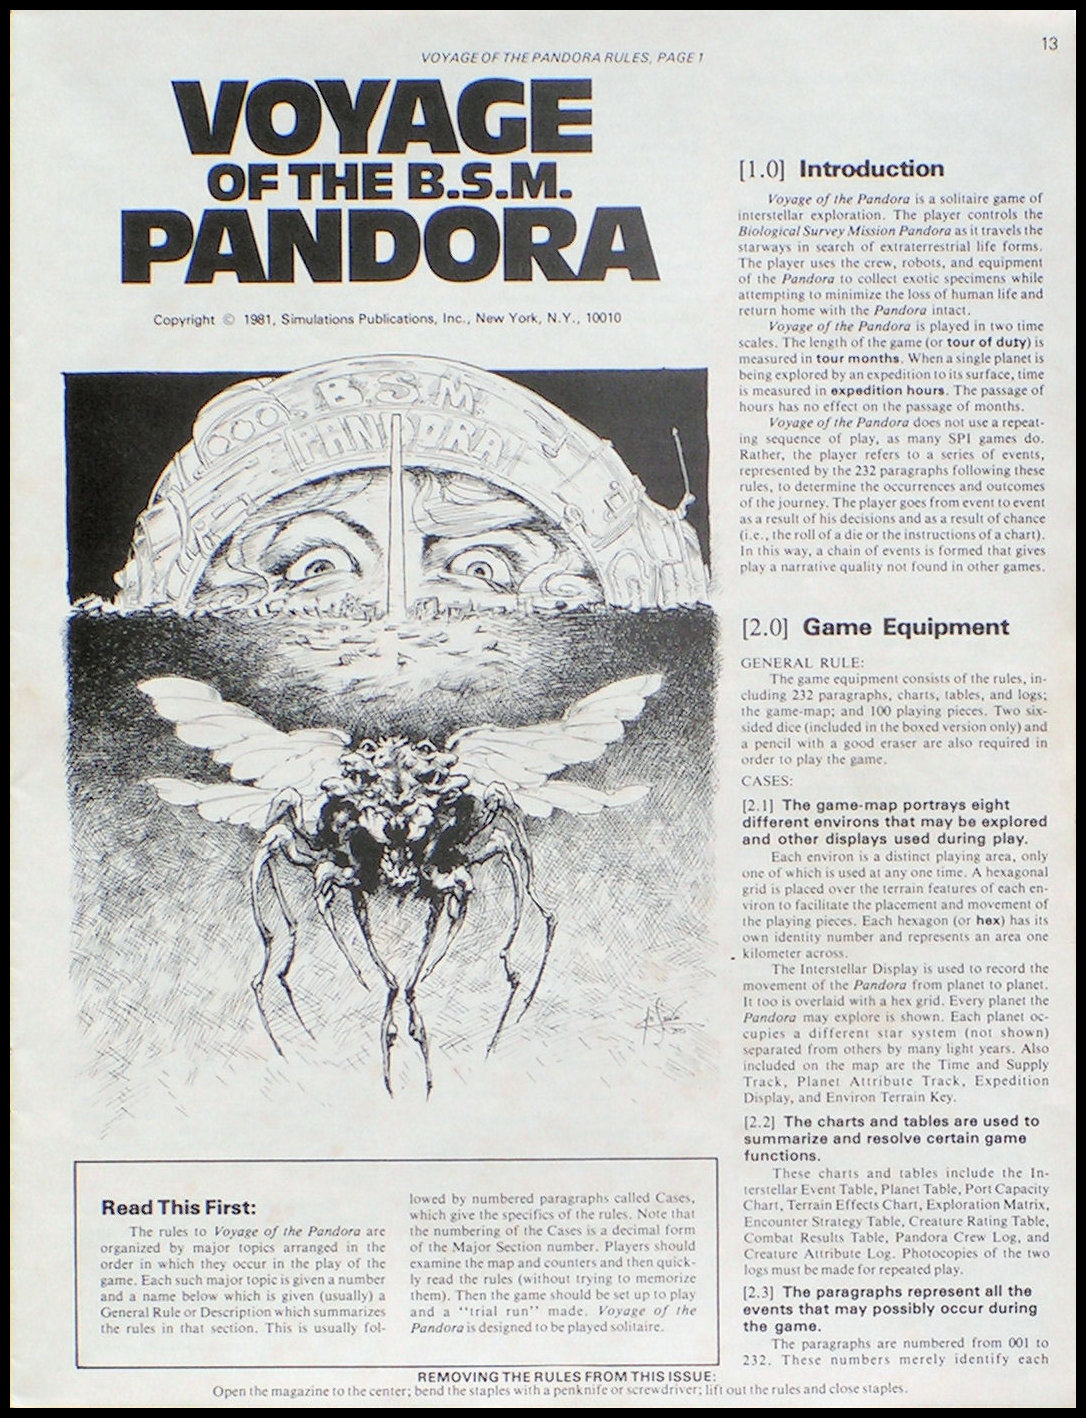 The Voyage Of The B.S.M. Pandora - Rulebook Cover